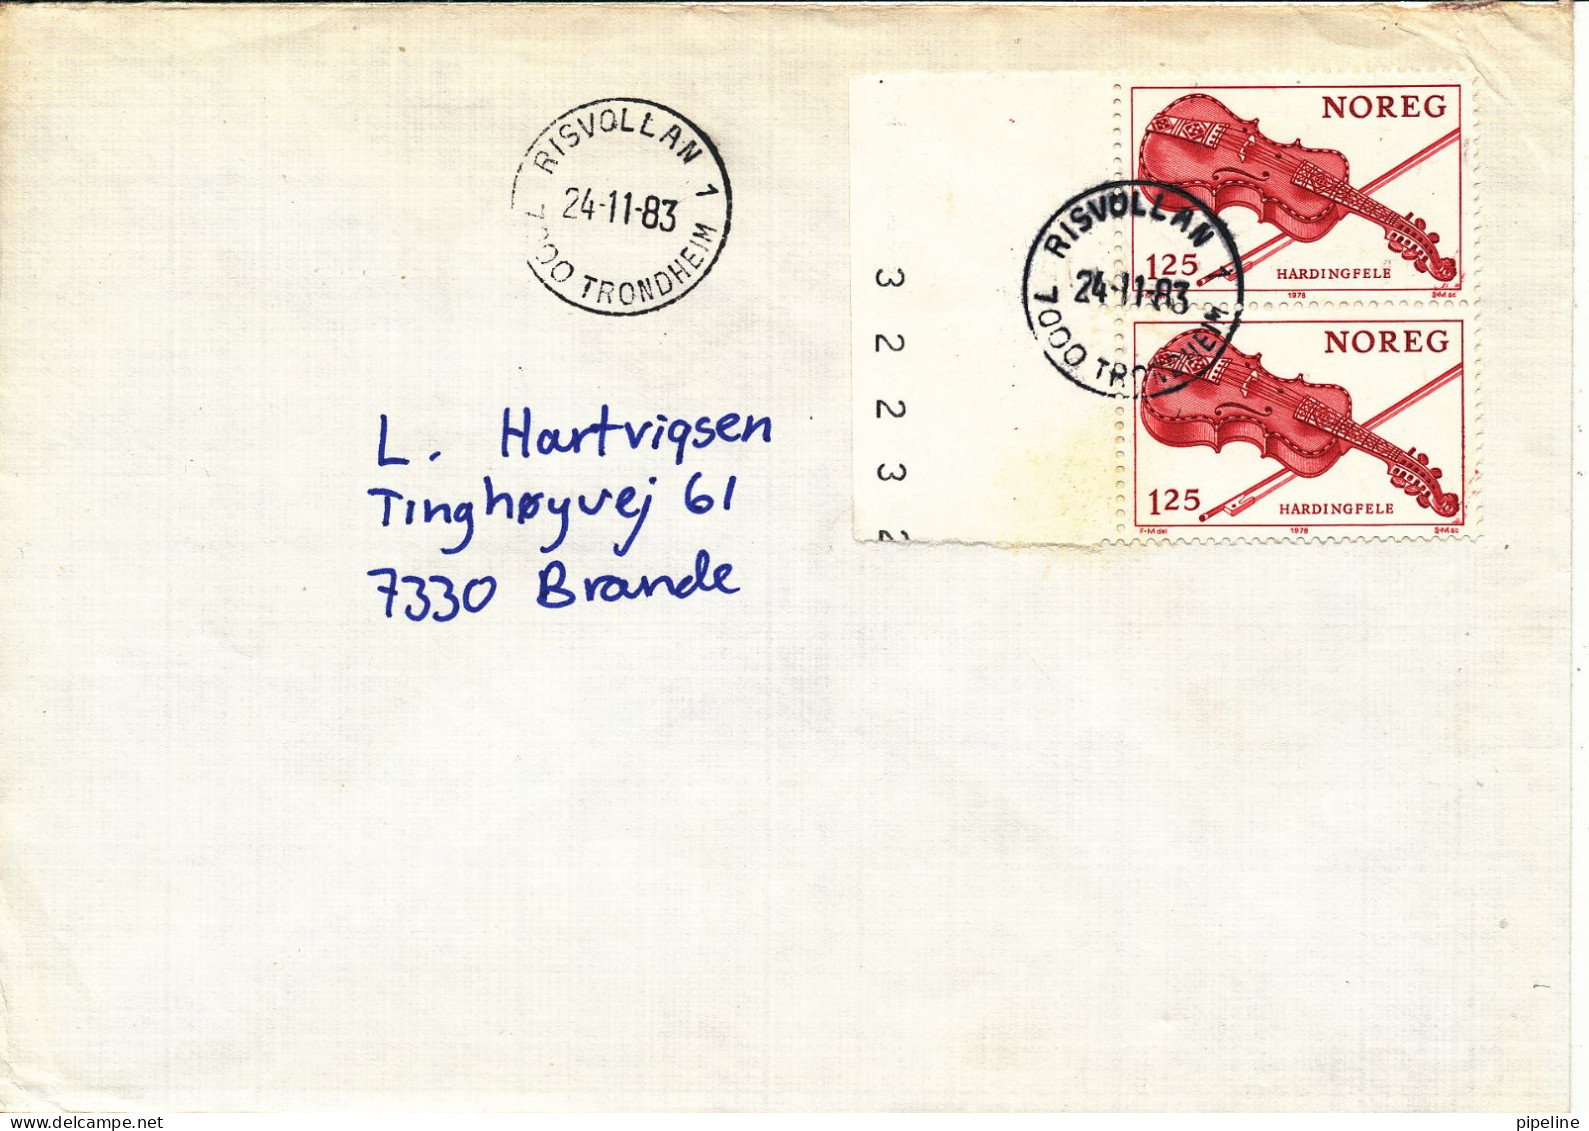 Norway Cover Sent To Denmark Risvollen Trondheim 24-11-1983 - Covers & Documents